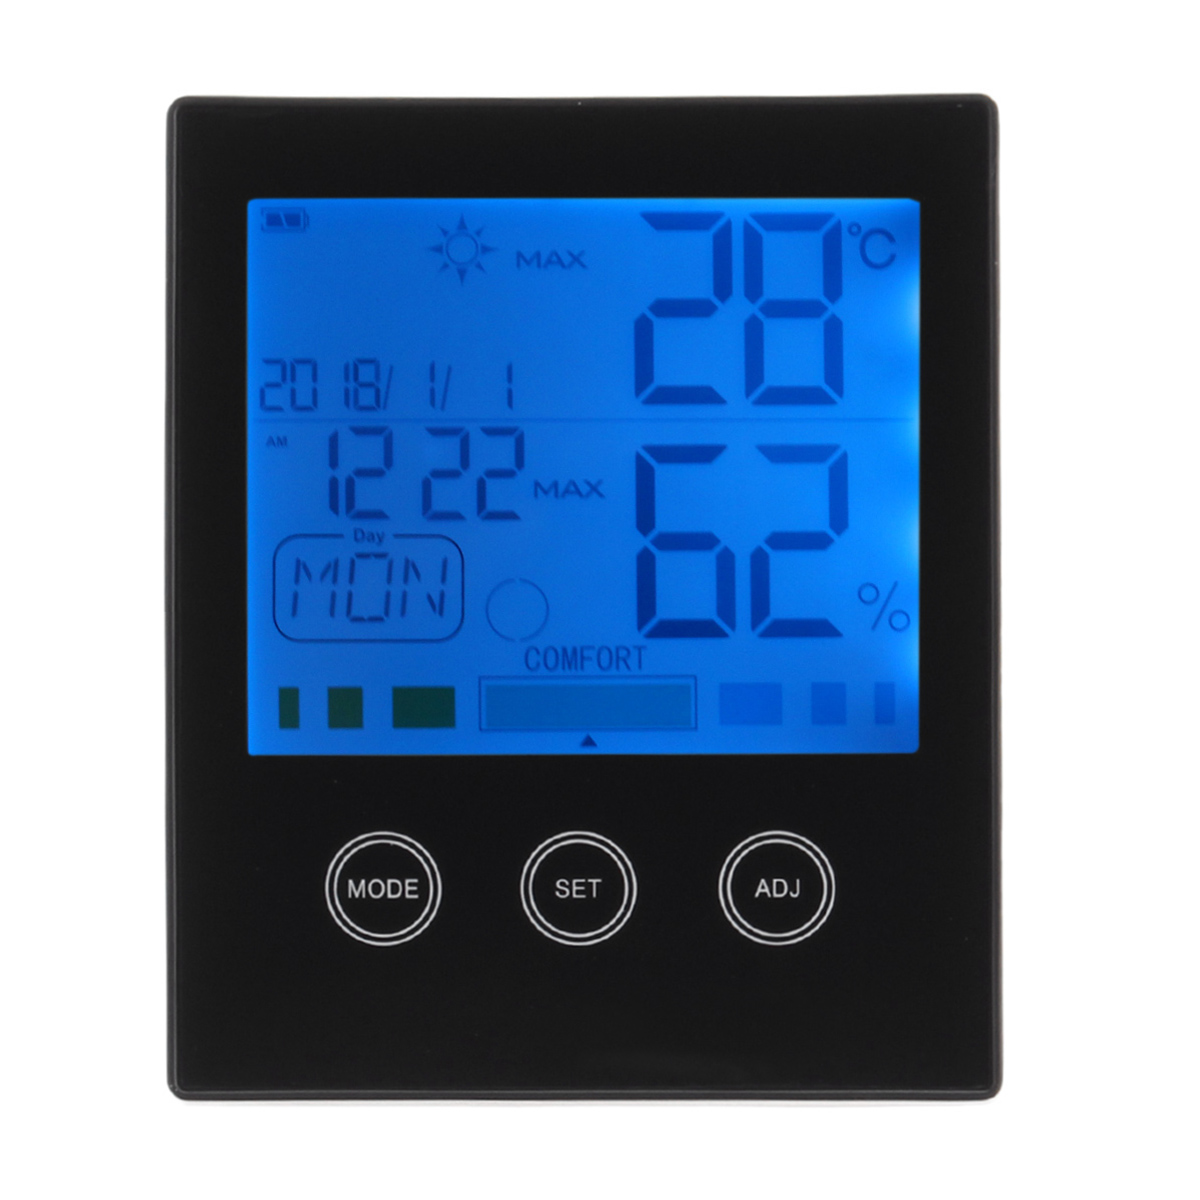 

CH-909 Large LCD Digital Thermometer Hygrometer Temperature Humidity Gauge Alarm Clock Thermometer